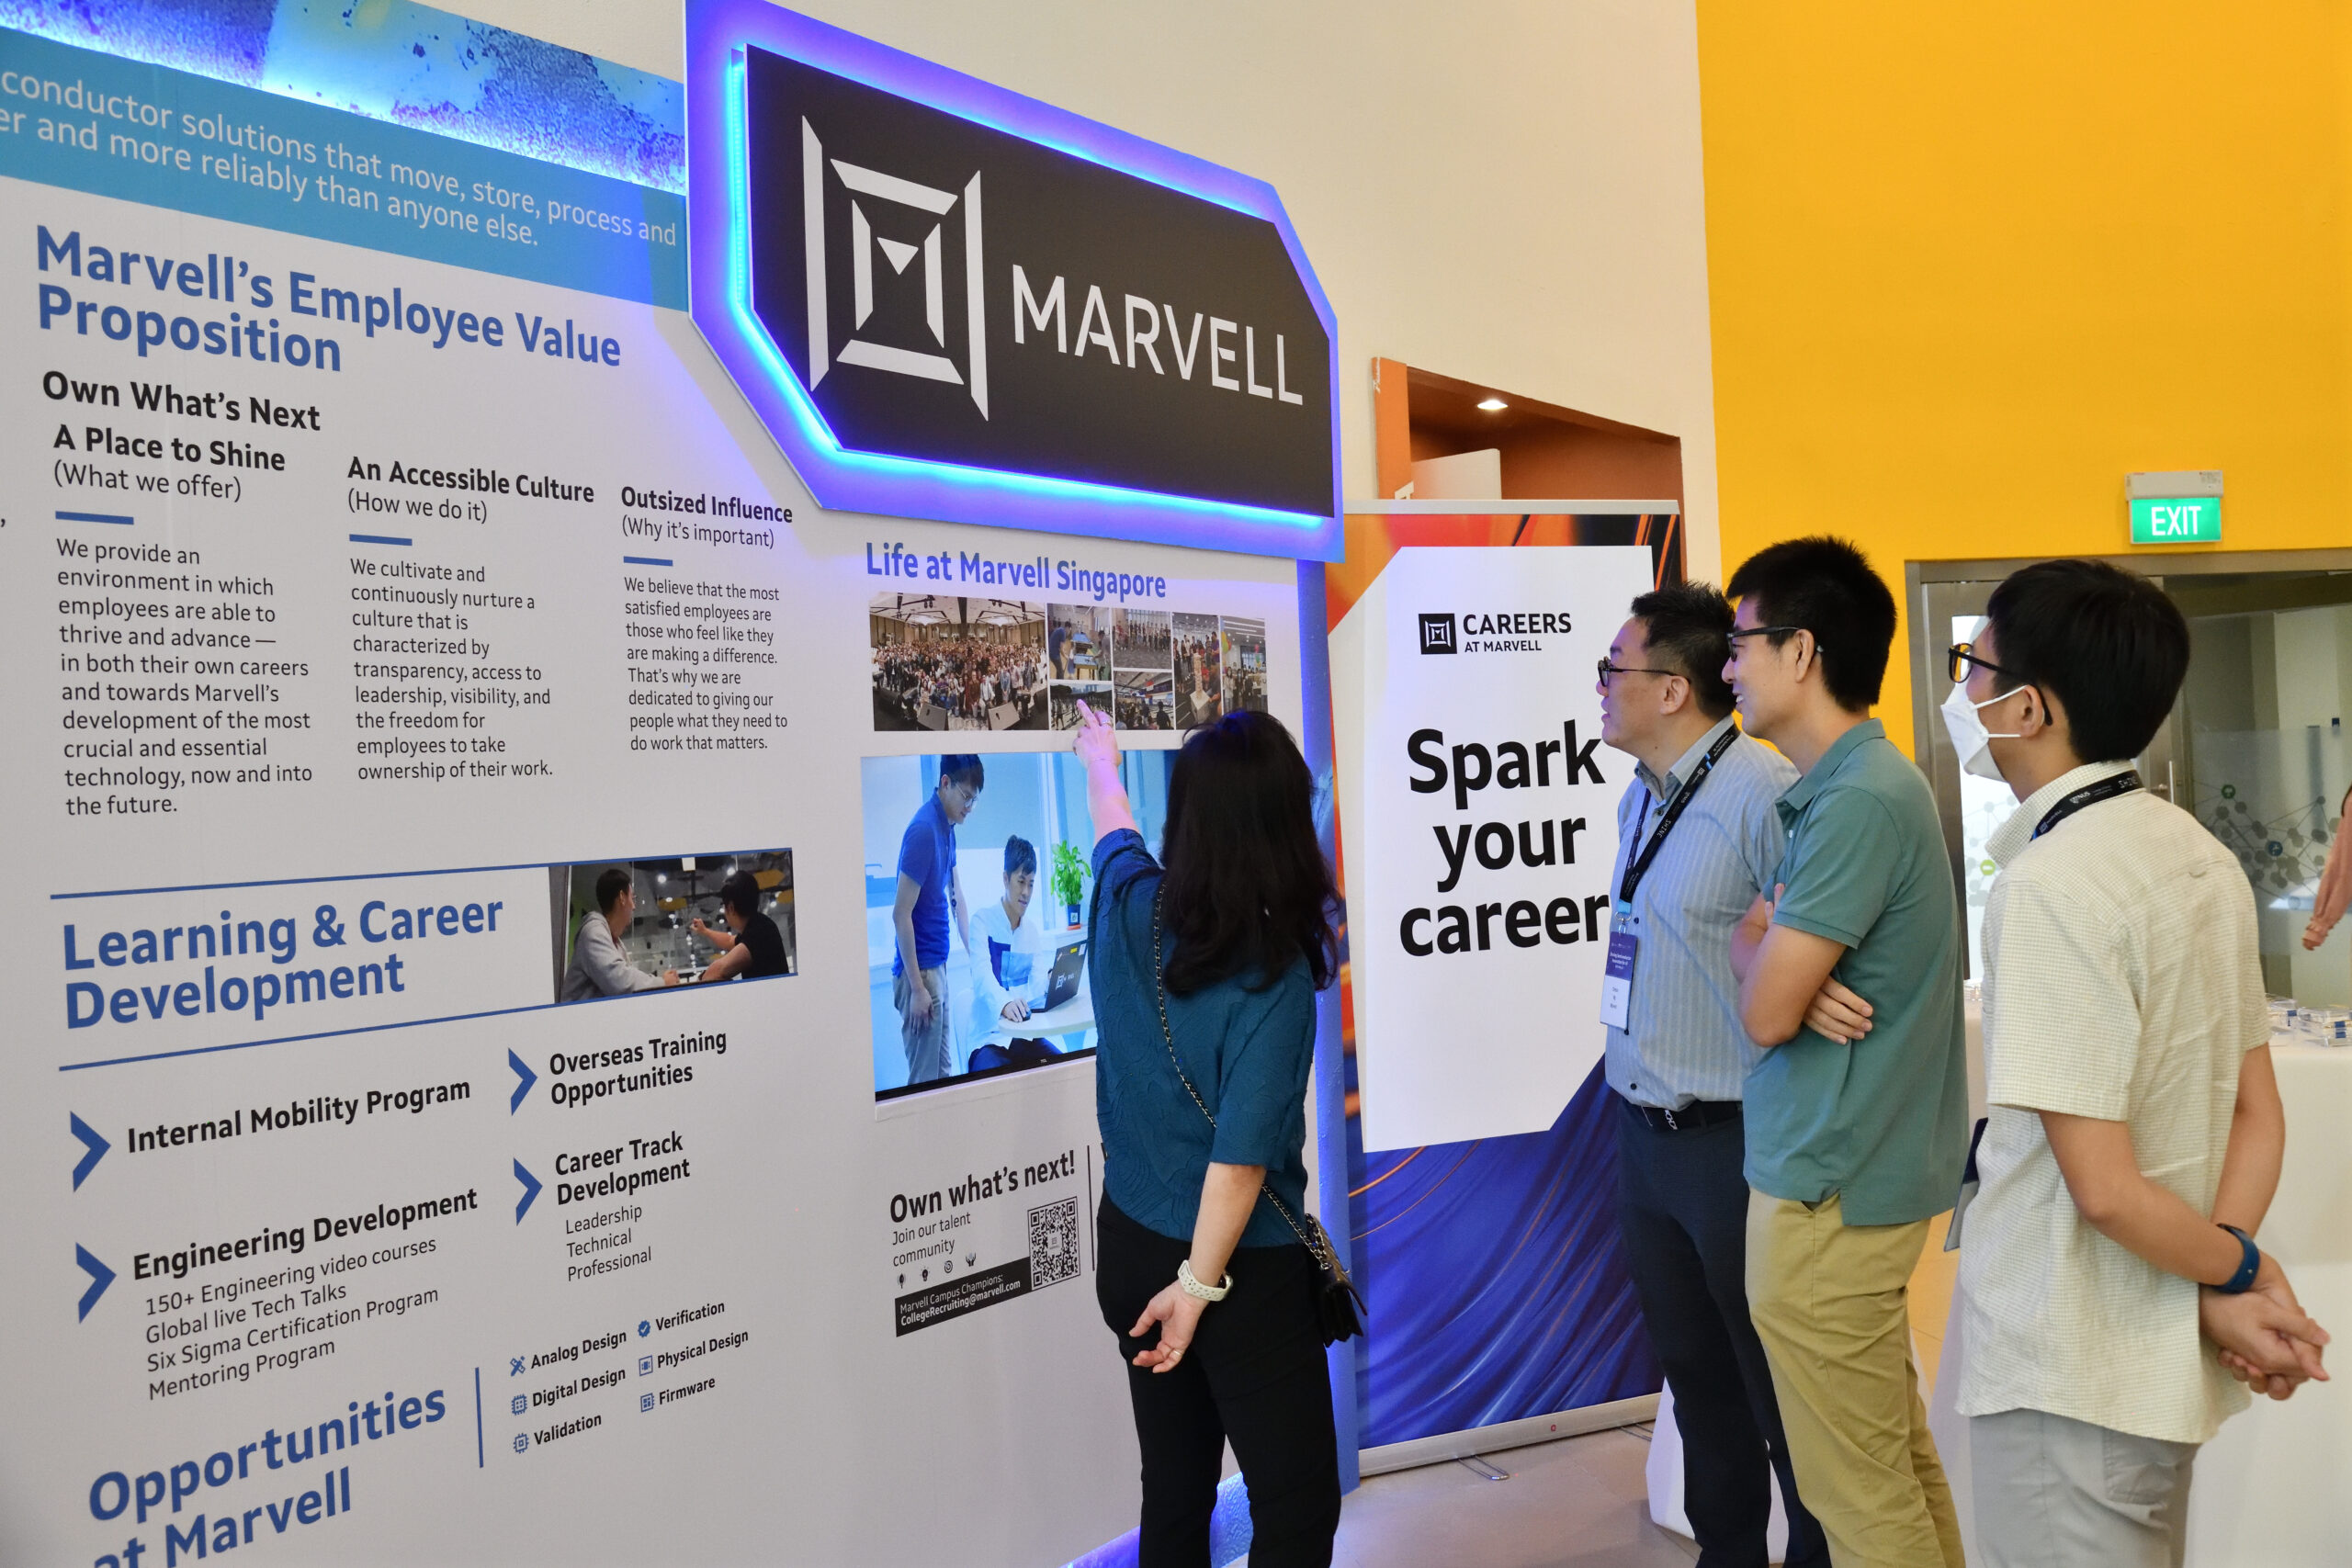 Participants looking at the career opportunities and programmes available at Marvell. 